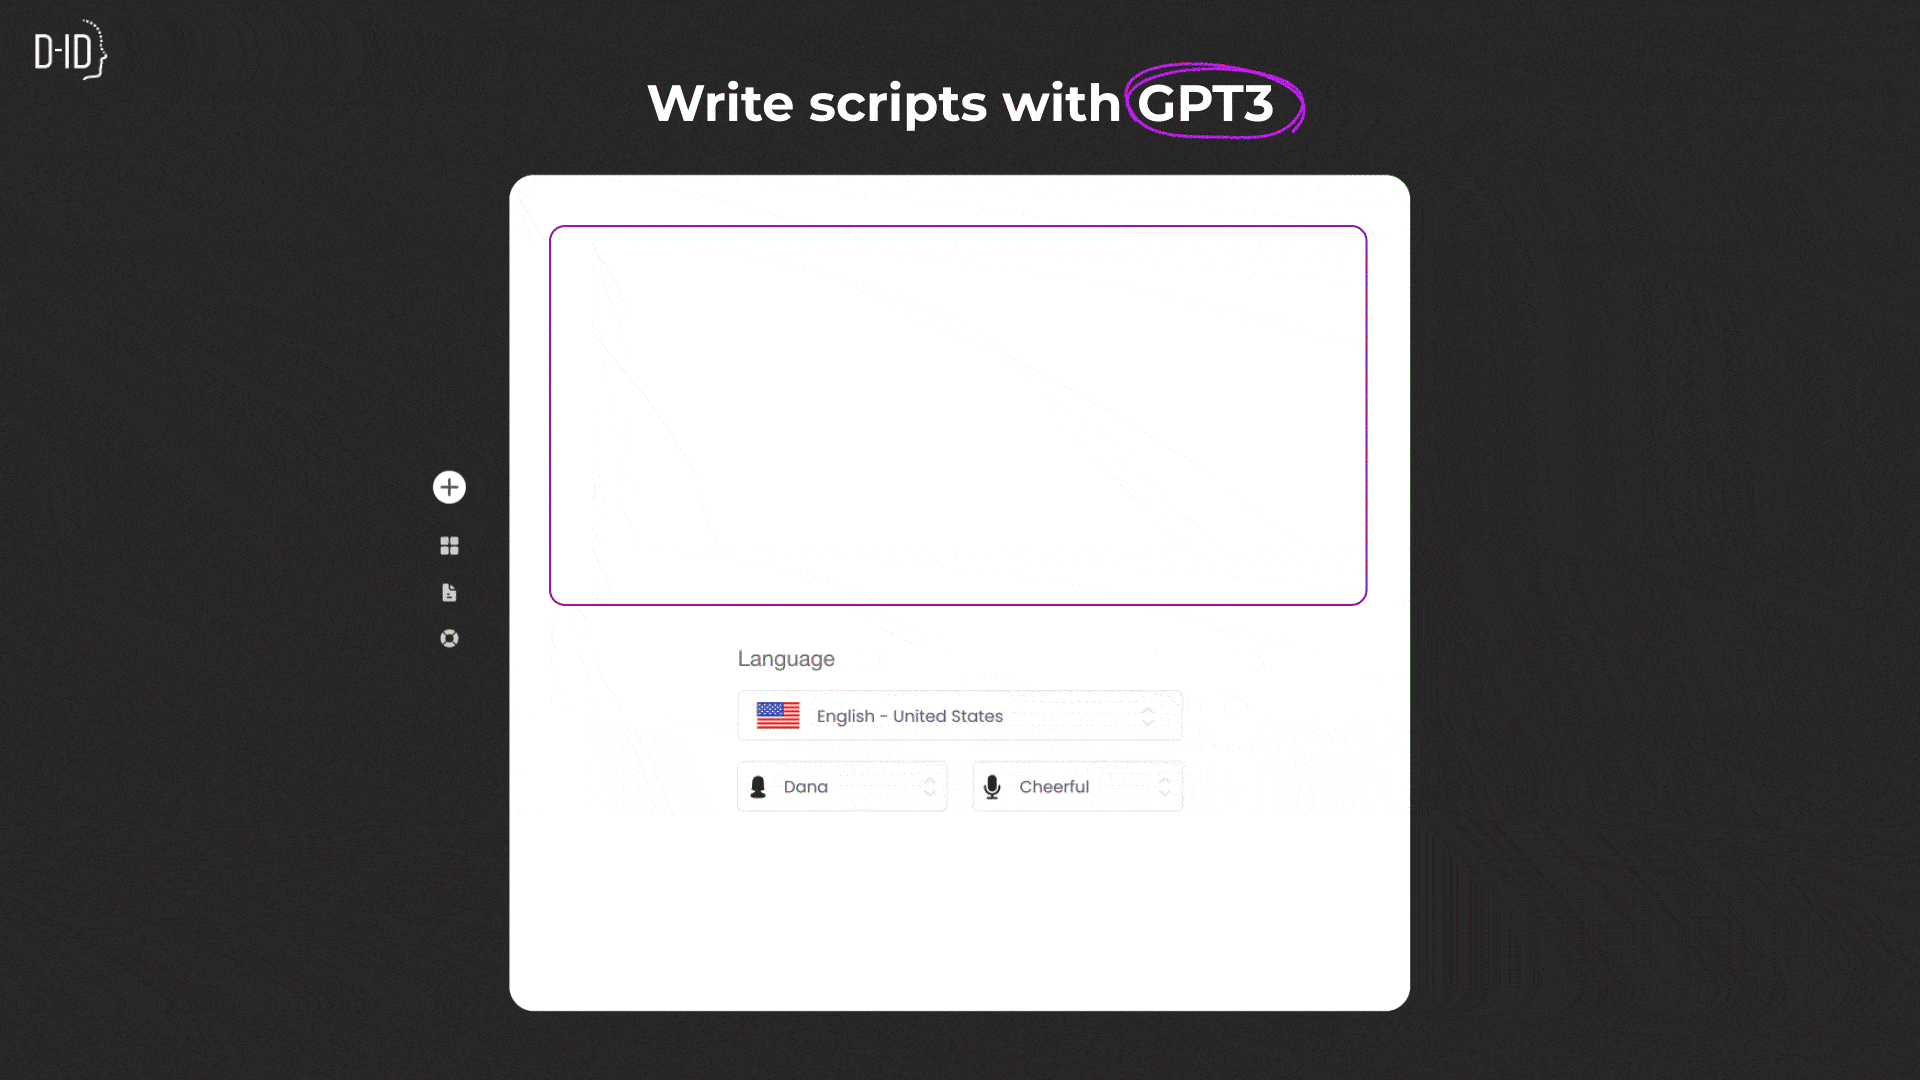 Create a script for your AI avatar using GPT-3